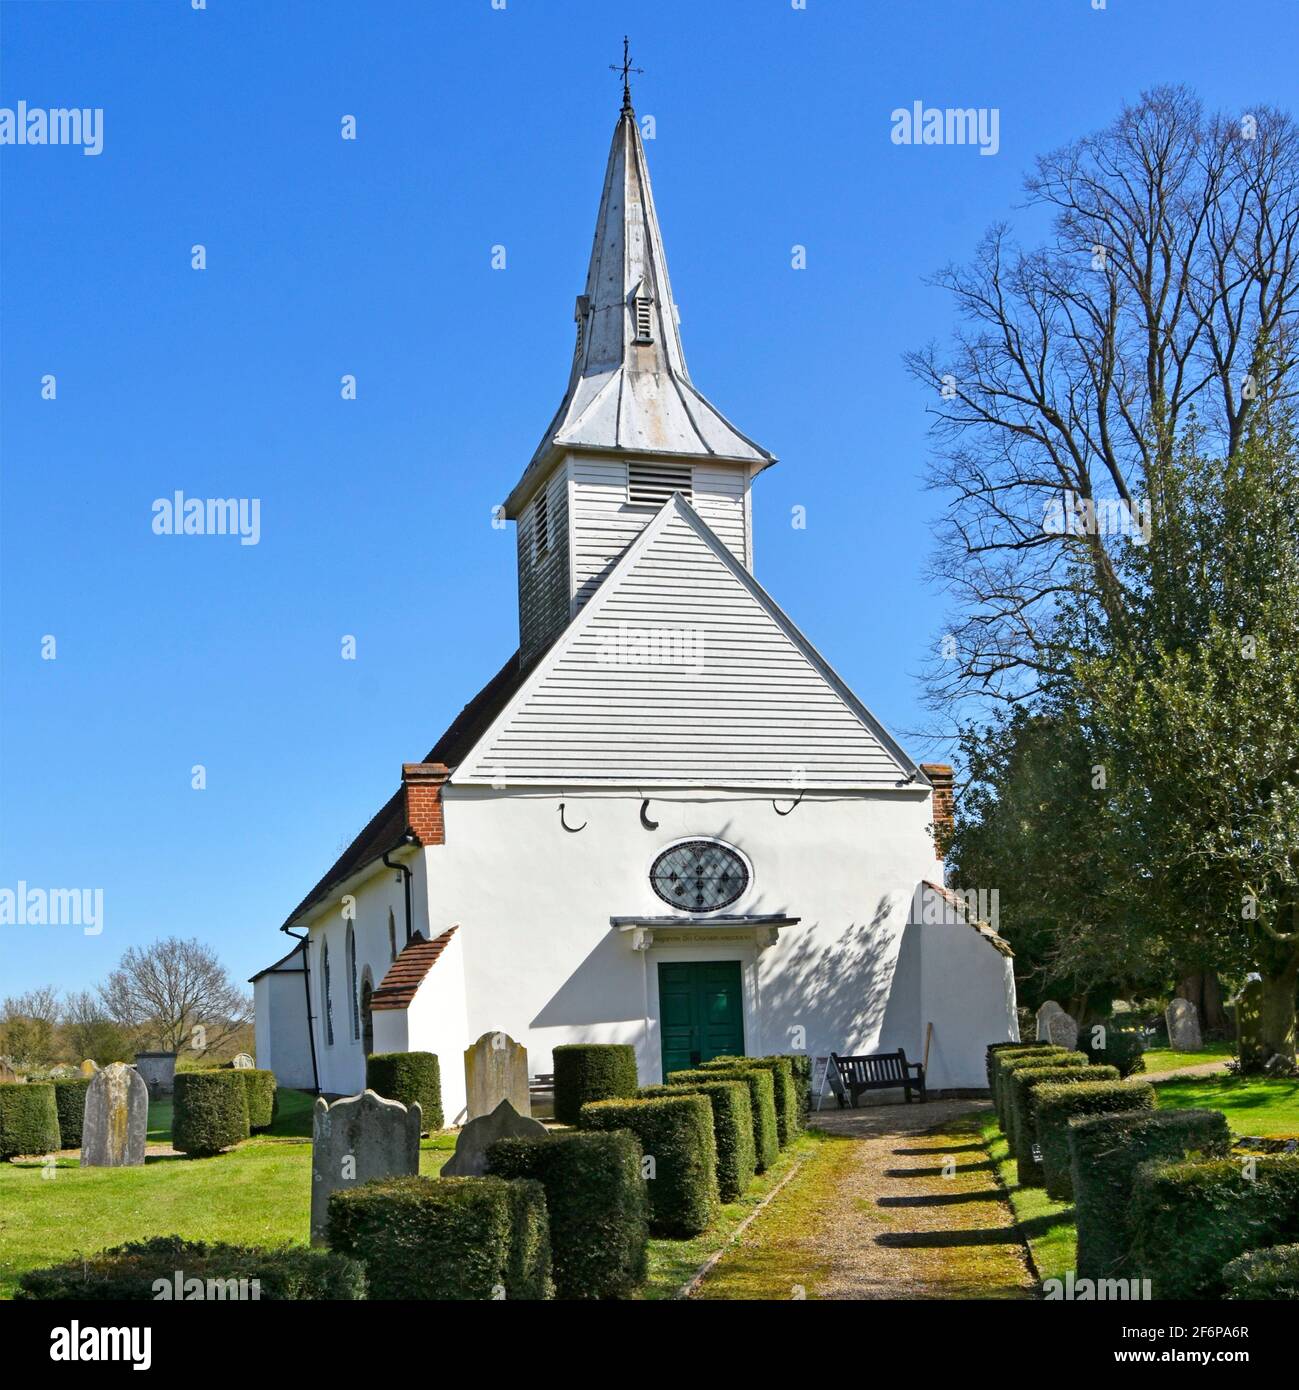 Old historical 12th century ancient medieval grade II listed Lambourne parish church building yew hedge topiary path bell tower spire Abridge Essex UK Stock Photo